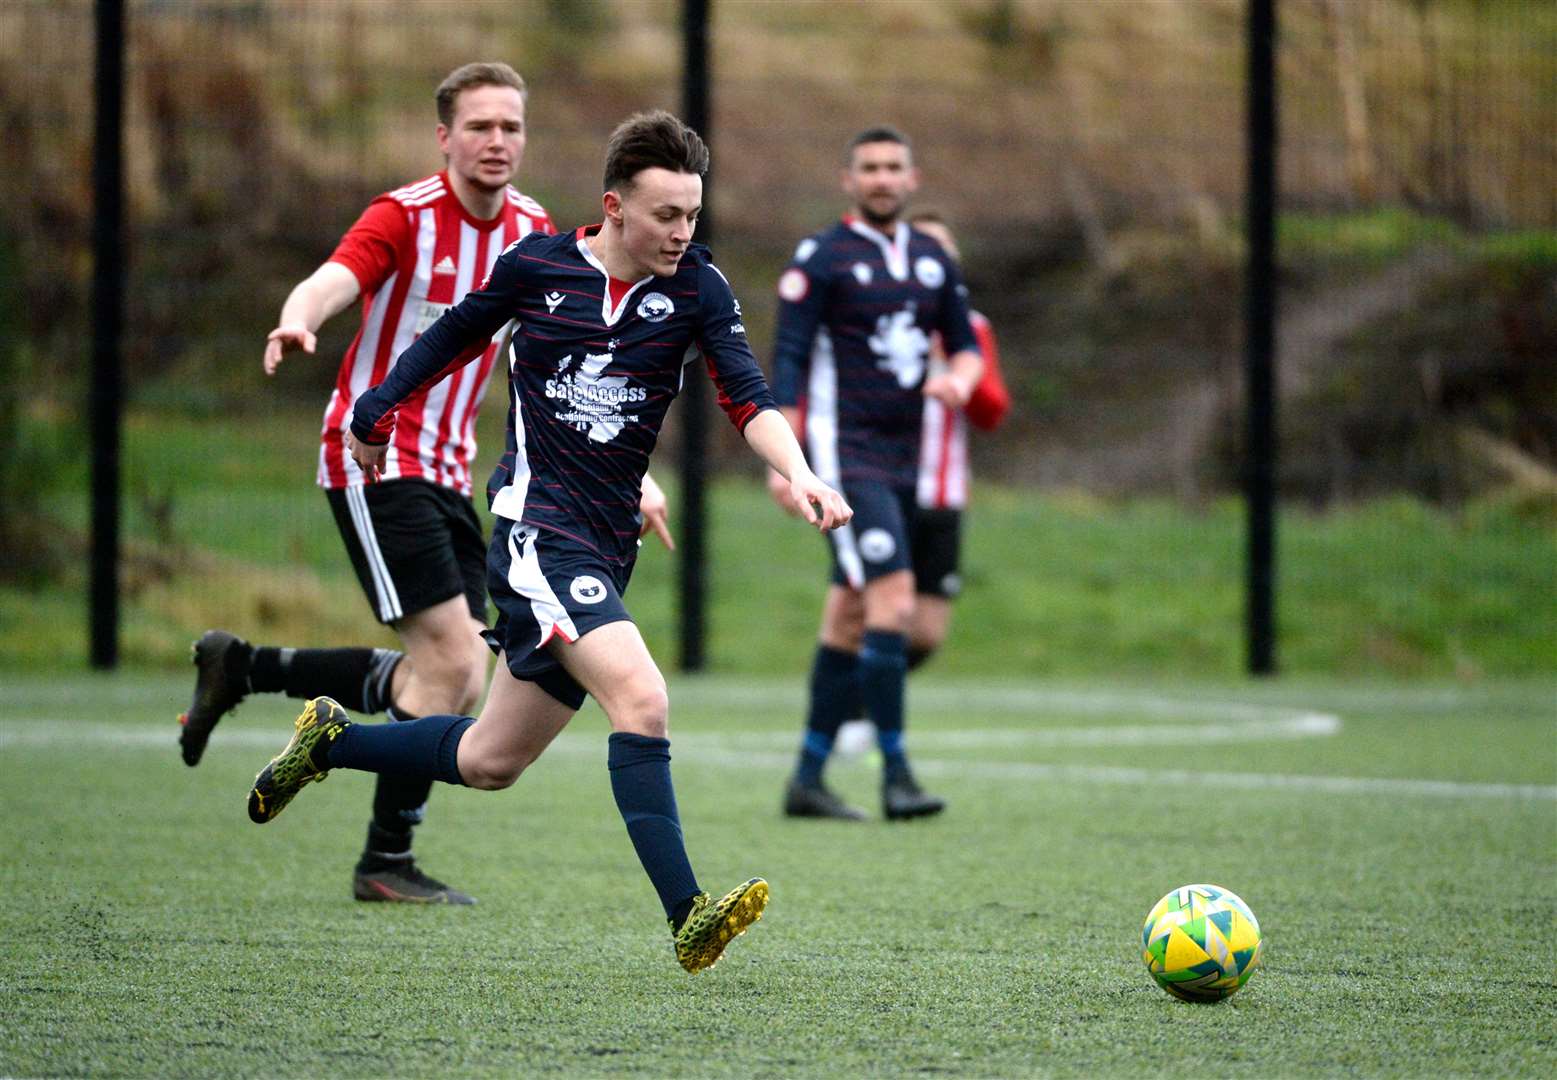 Inverness Athletic v St Duthus, North Caledonian Cup at Inverness Royal Academy: Dominic Macaulay, Inverness Athletic. Picture: James Mackenzie.